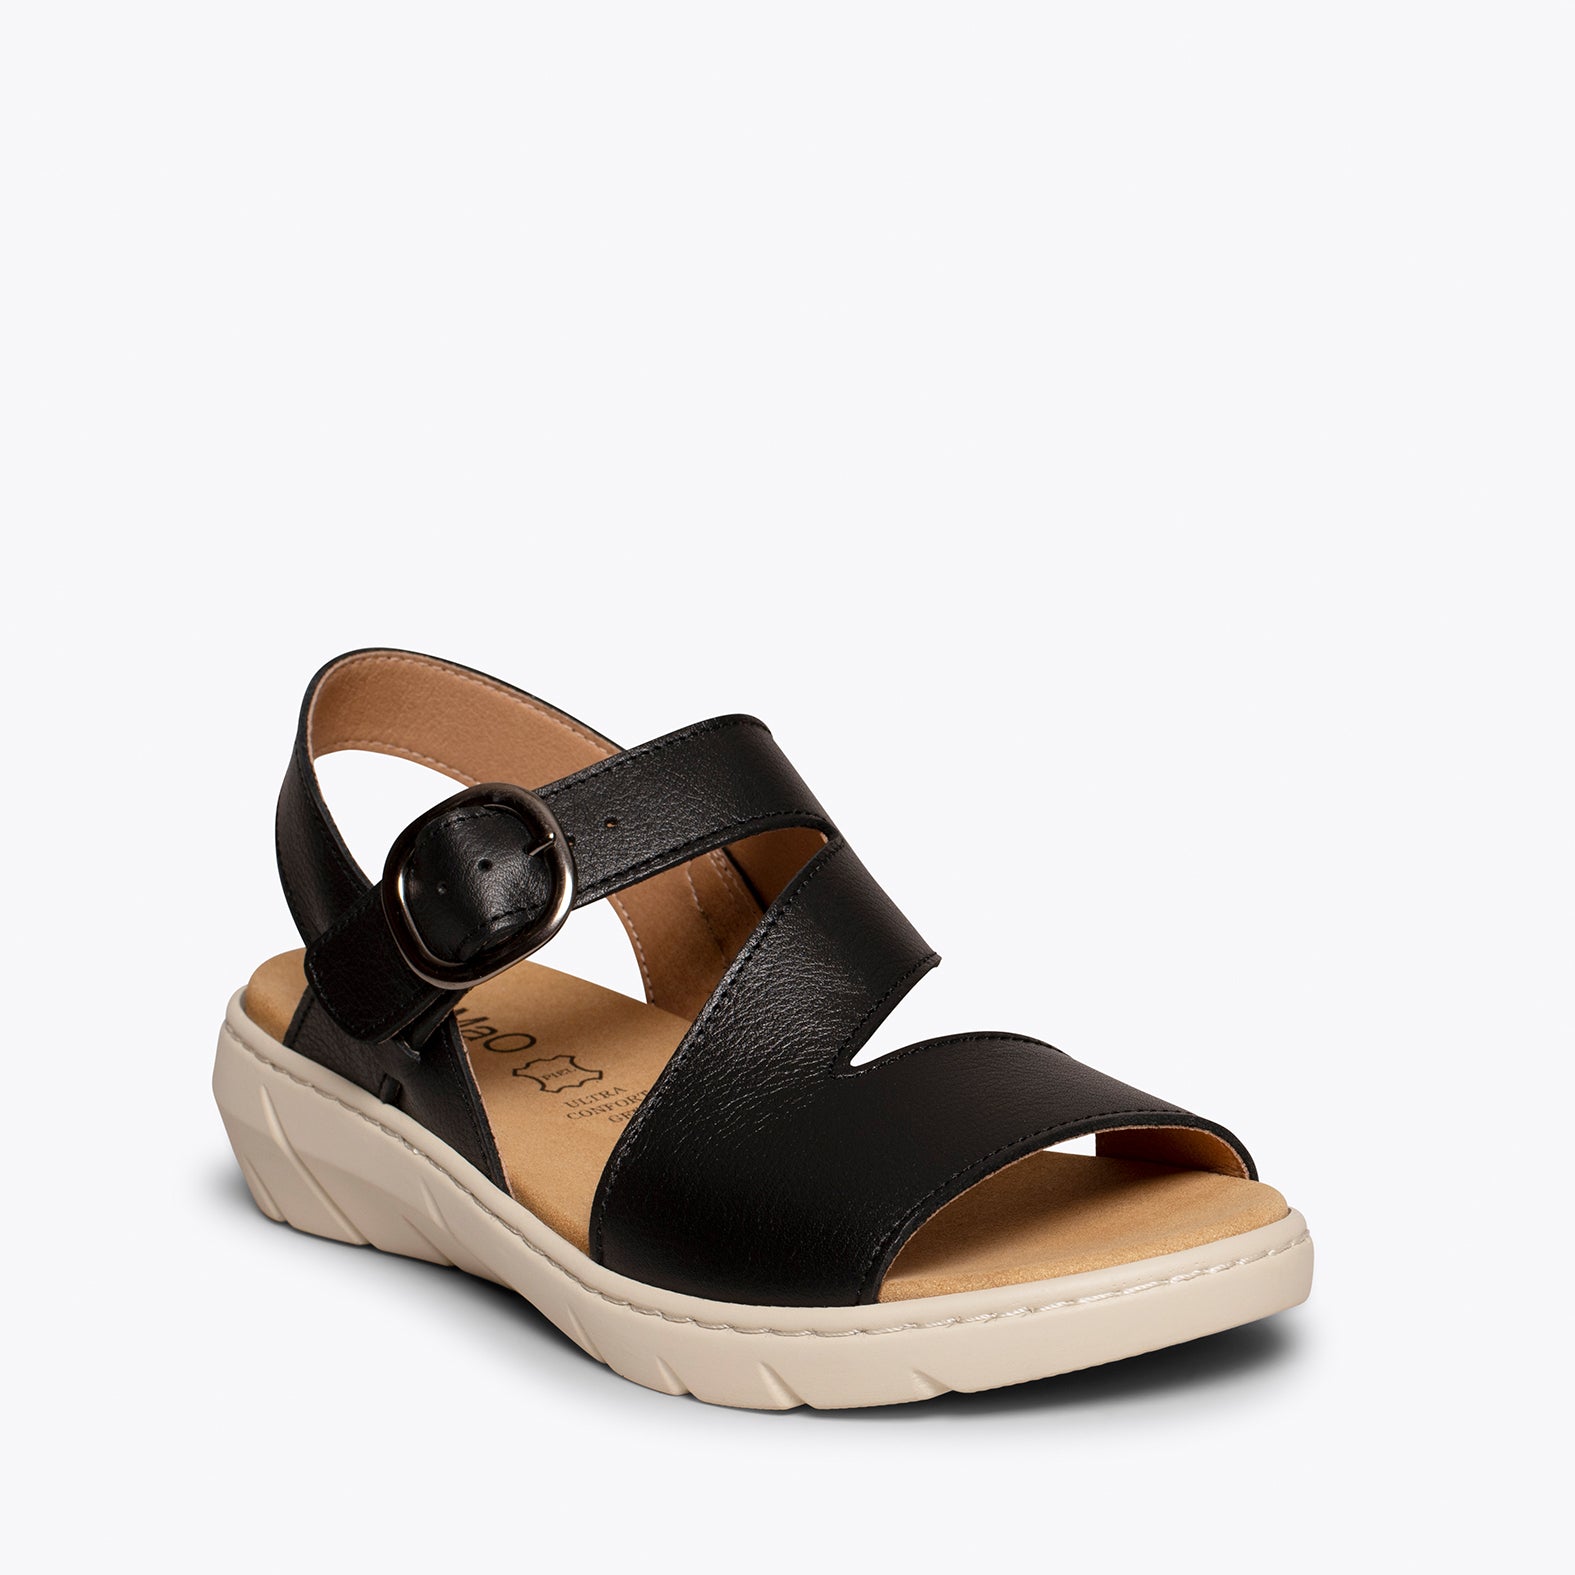 NATURA – BLACK sandals with removable insole